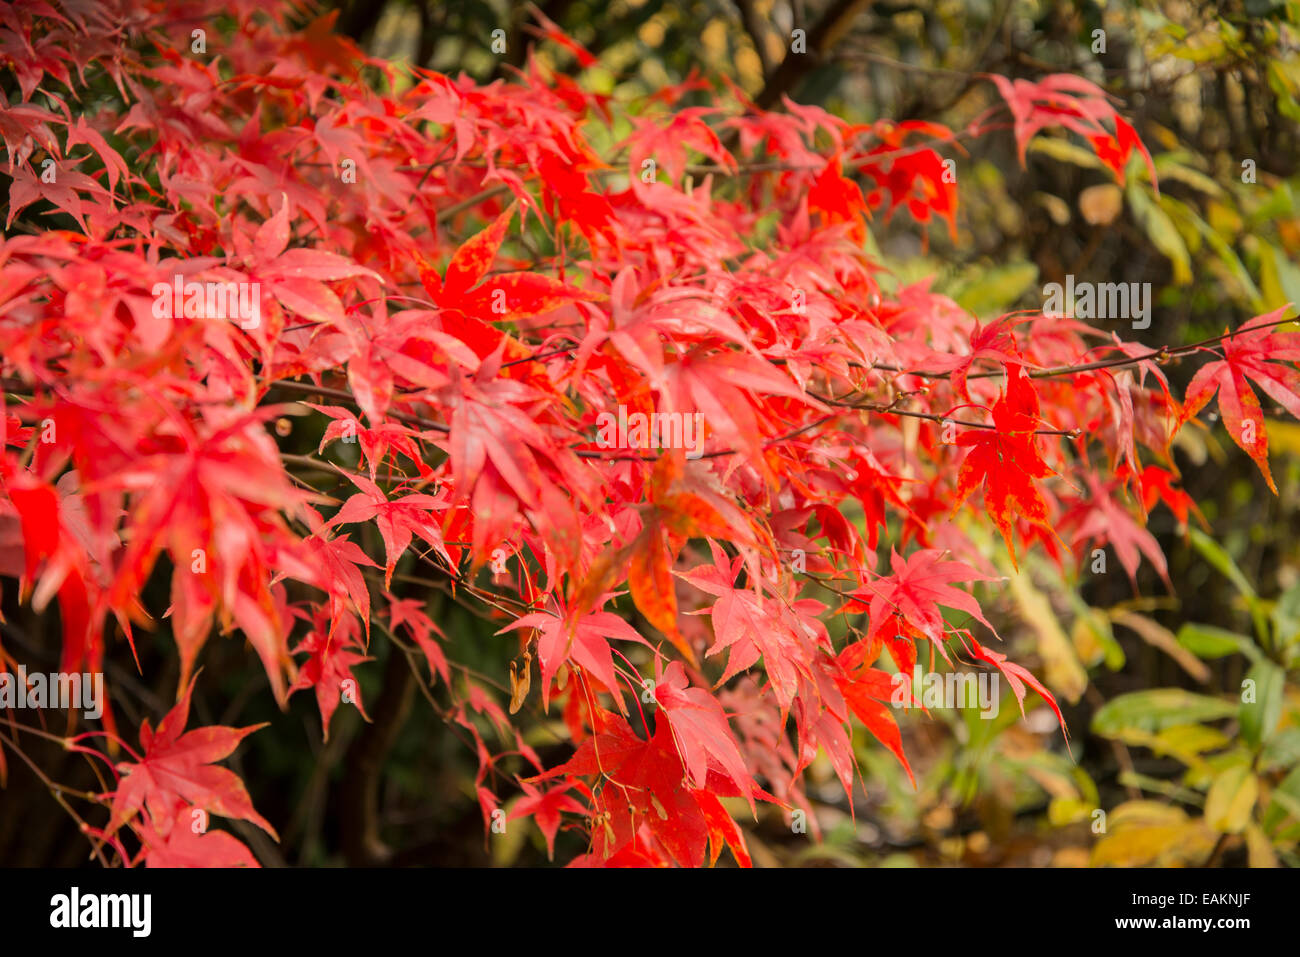 Autumn colours in Greenwich Park, London. November 2014 Stock Photo